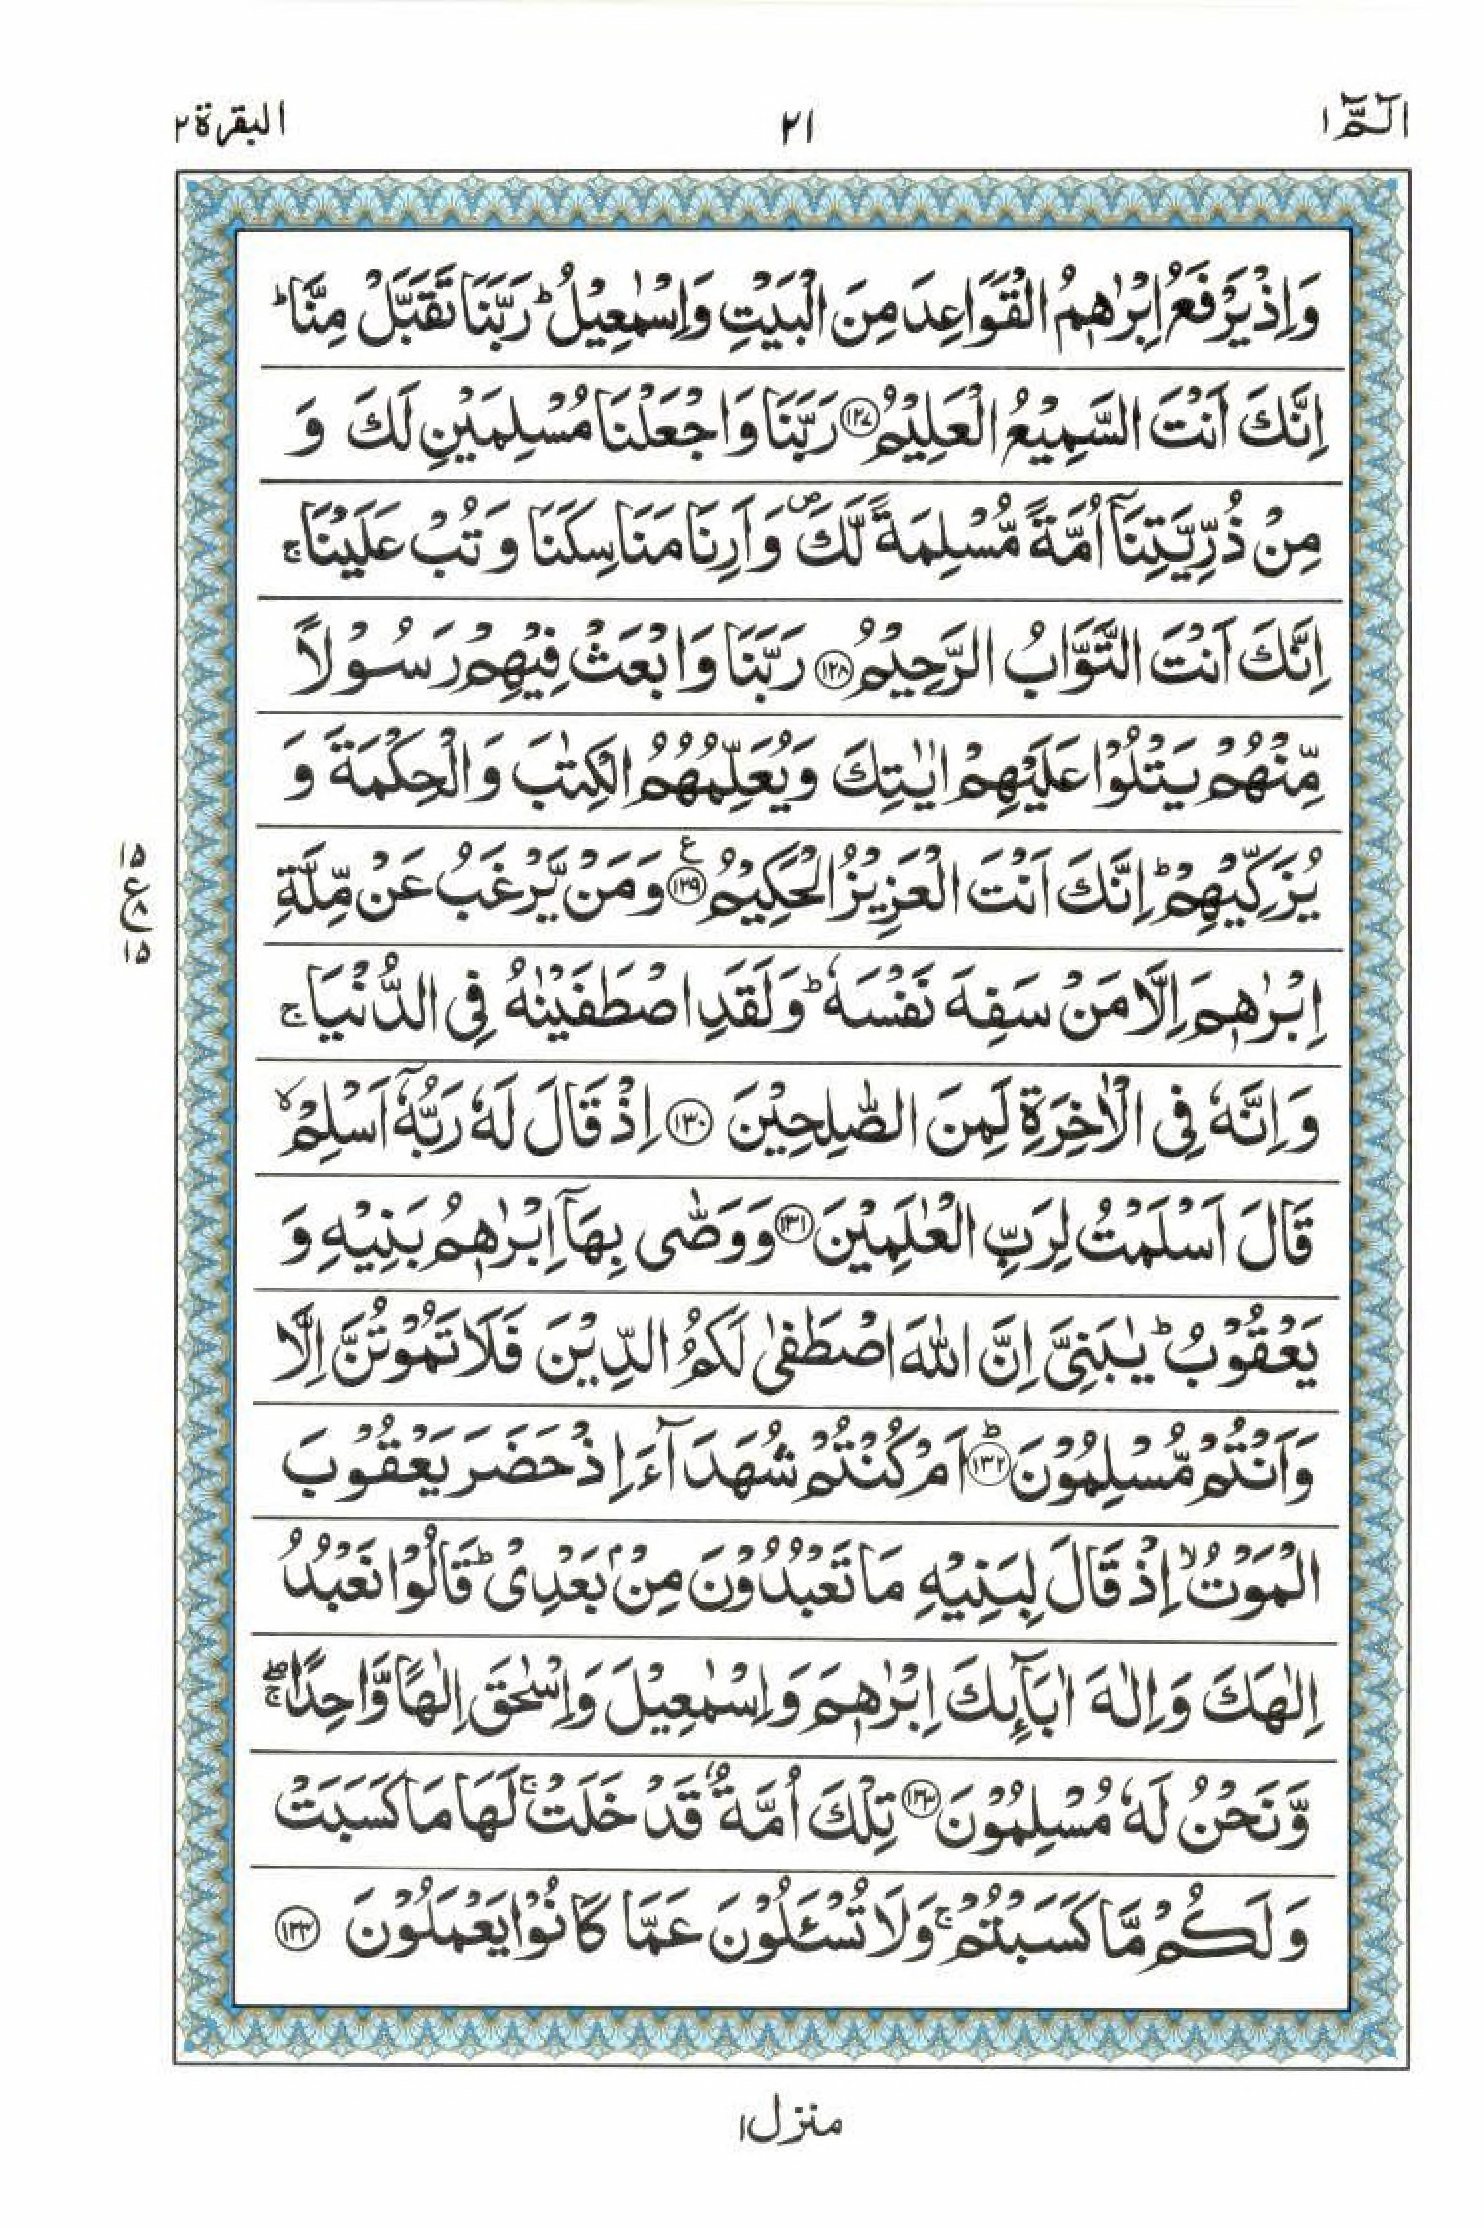 Read 15 Lines Quran, Part / Chapter / Siparah 1 Page 21